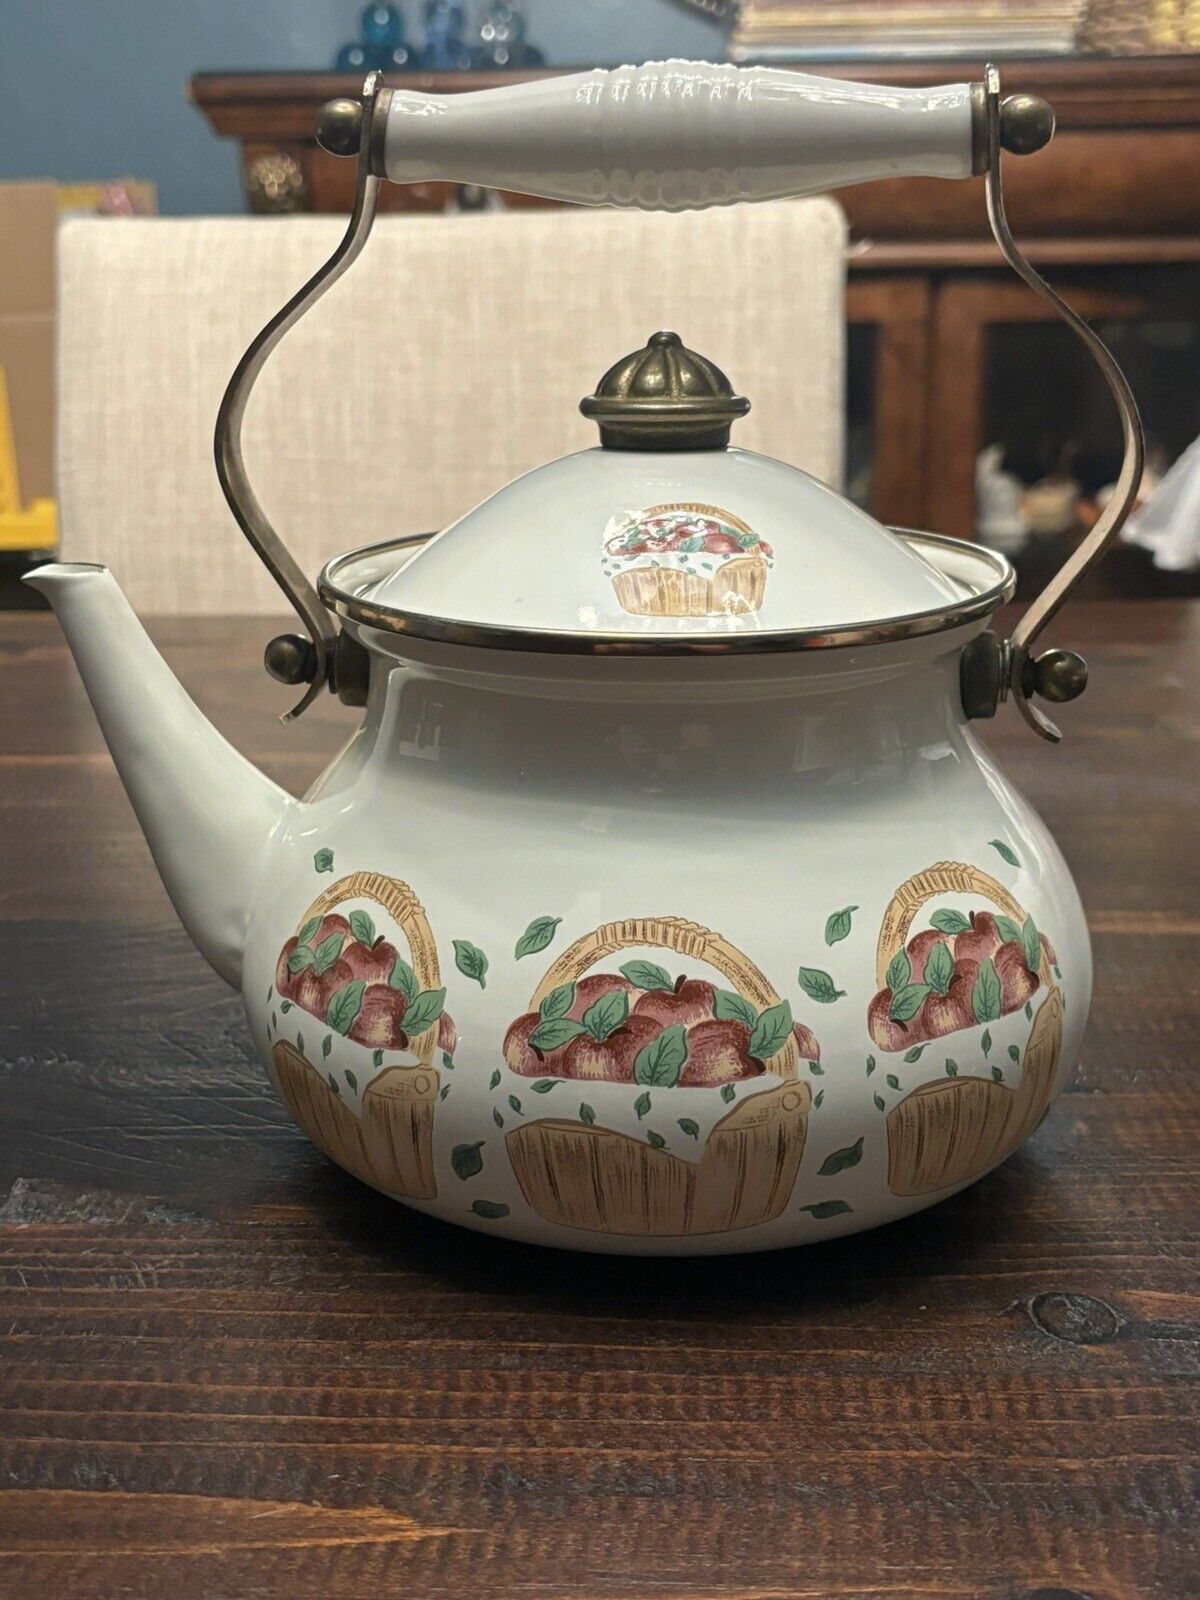 Vintage White Enamel Teapot/Kettle With Brass Handle With Baskets Full Of Apples